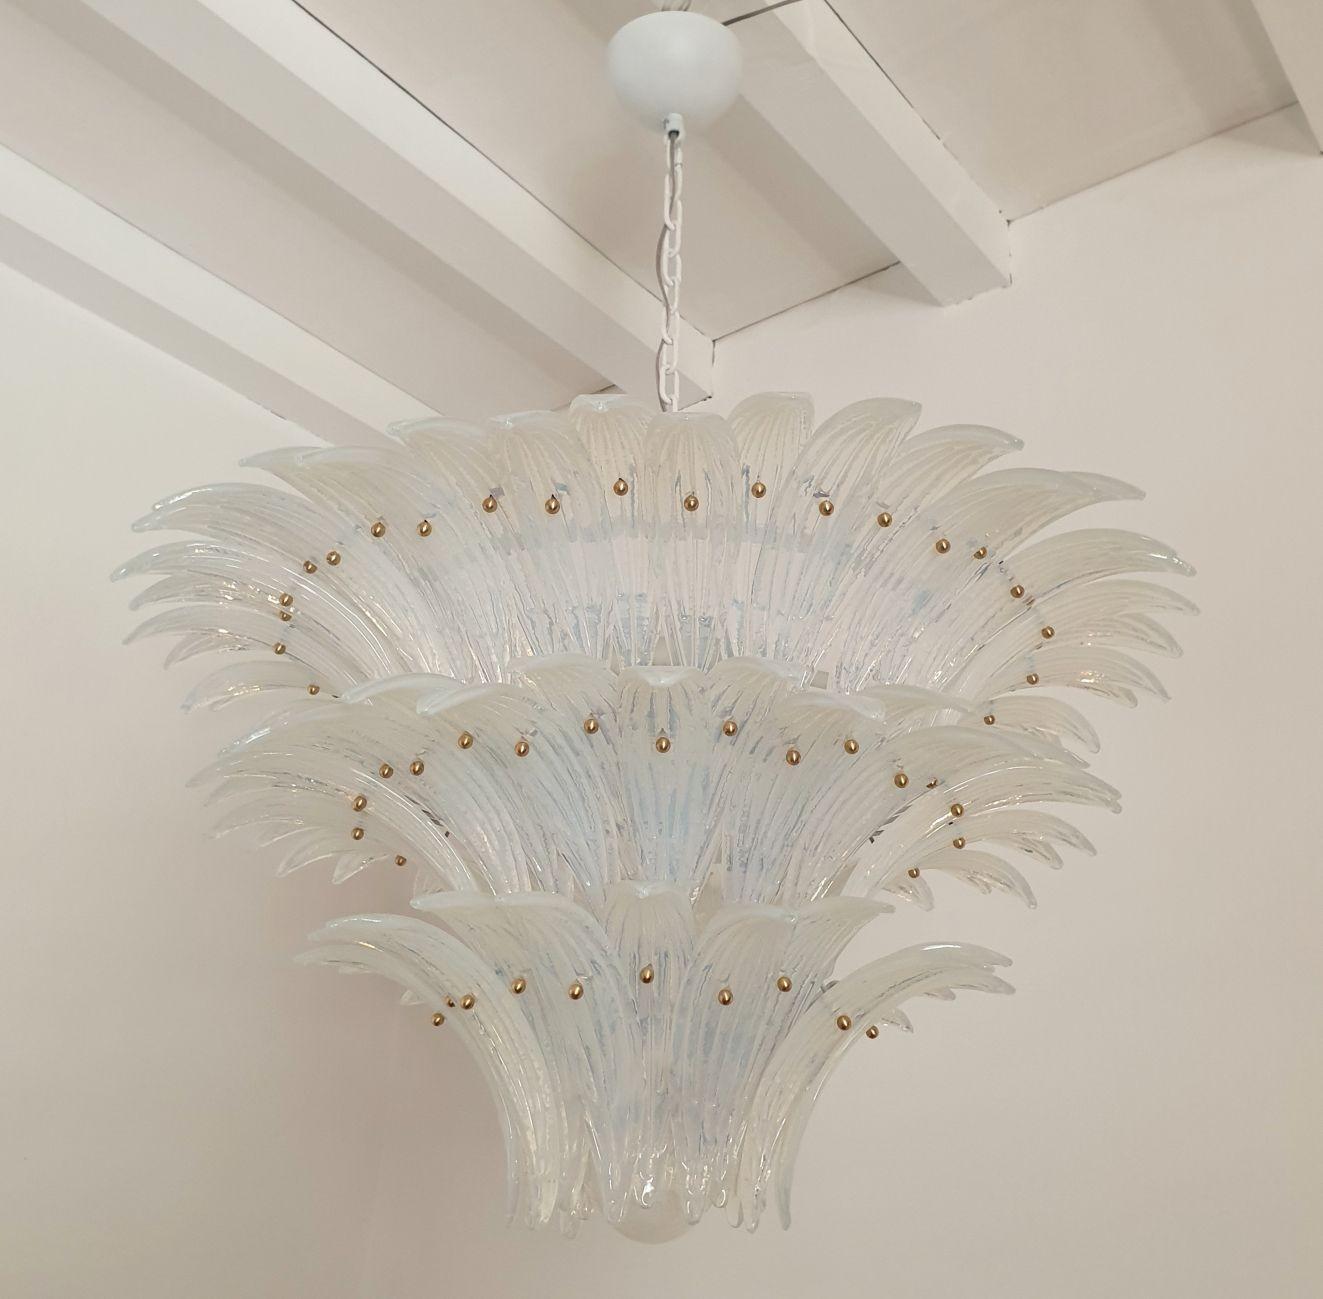 Large Mid-Century Modern Murano glass Palmette chandelier, Barovier and Toso style, Italy 1970s.
The chandelier is made of a white painted metal frame and Opalescent Murano glass palmettes.
The opaline coloration on Murano glass creates a